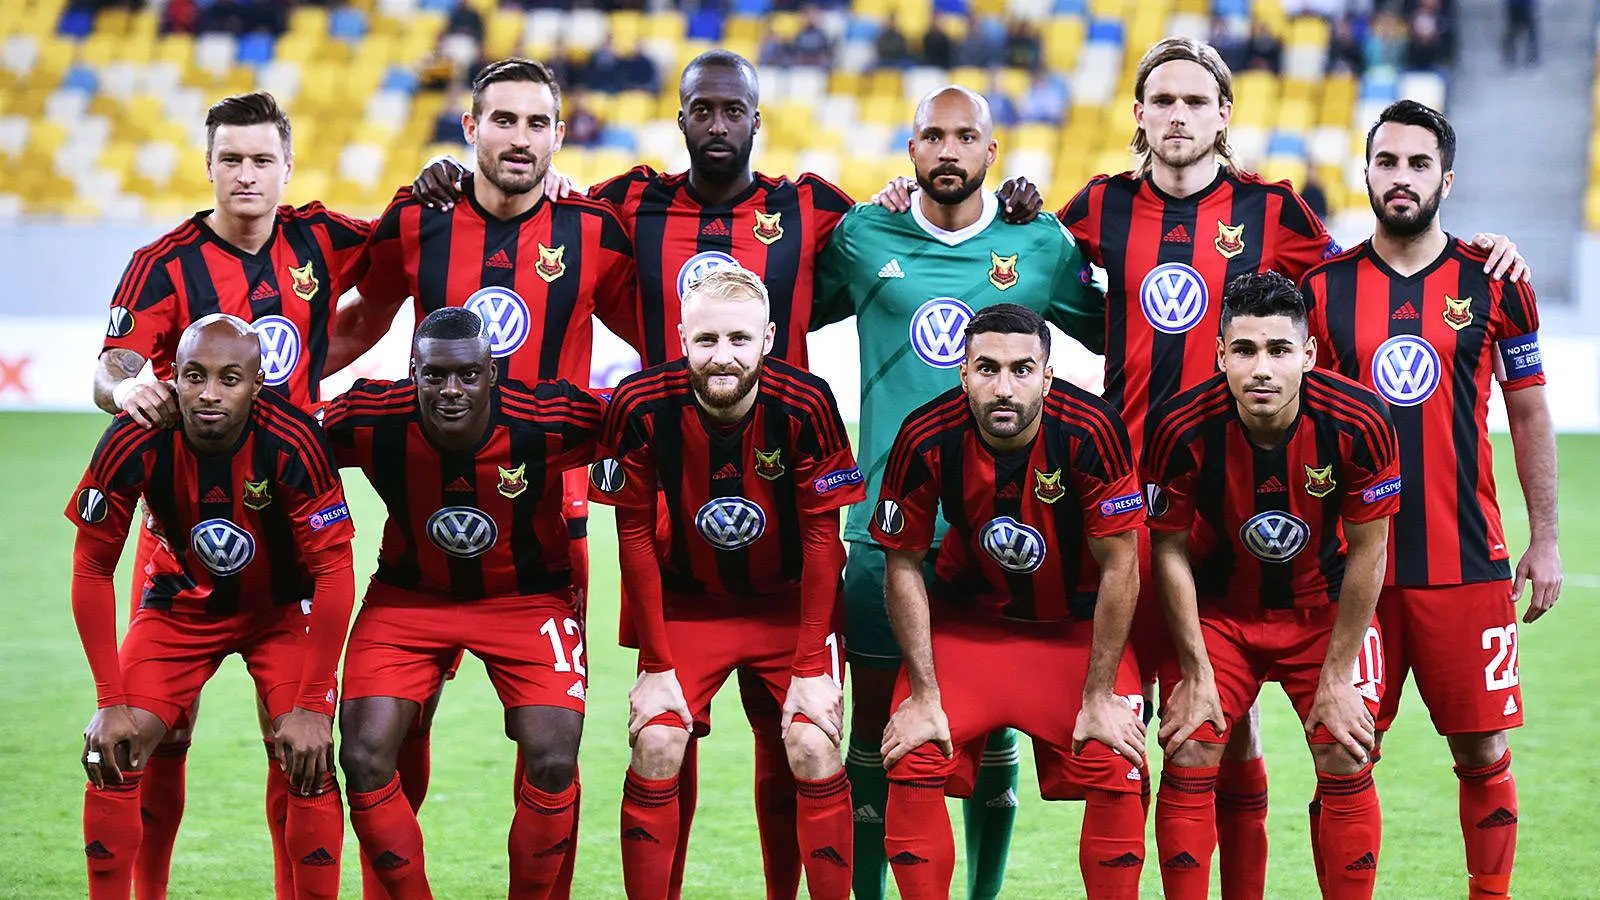 ostersunds-fk-18-football-club-facts